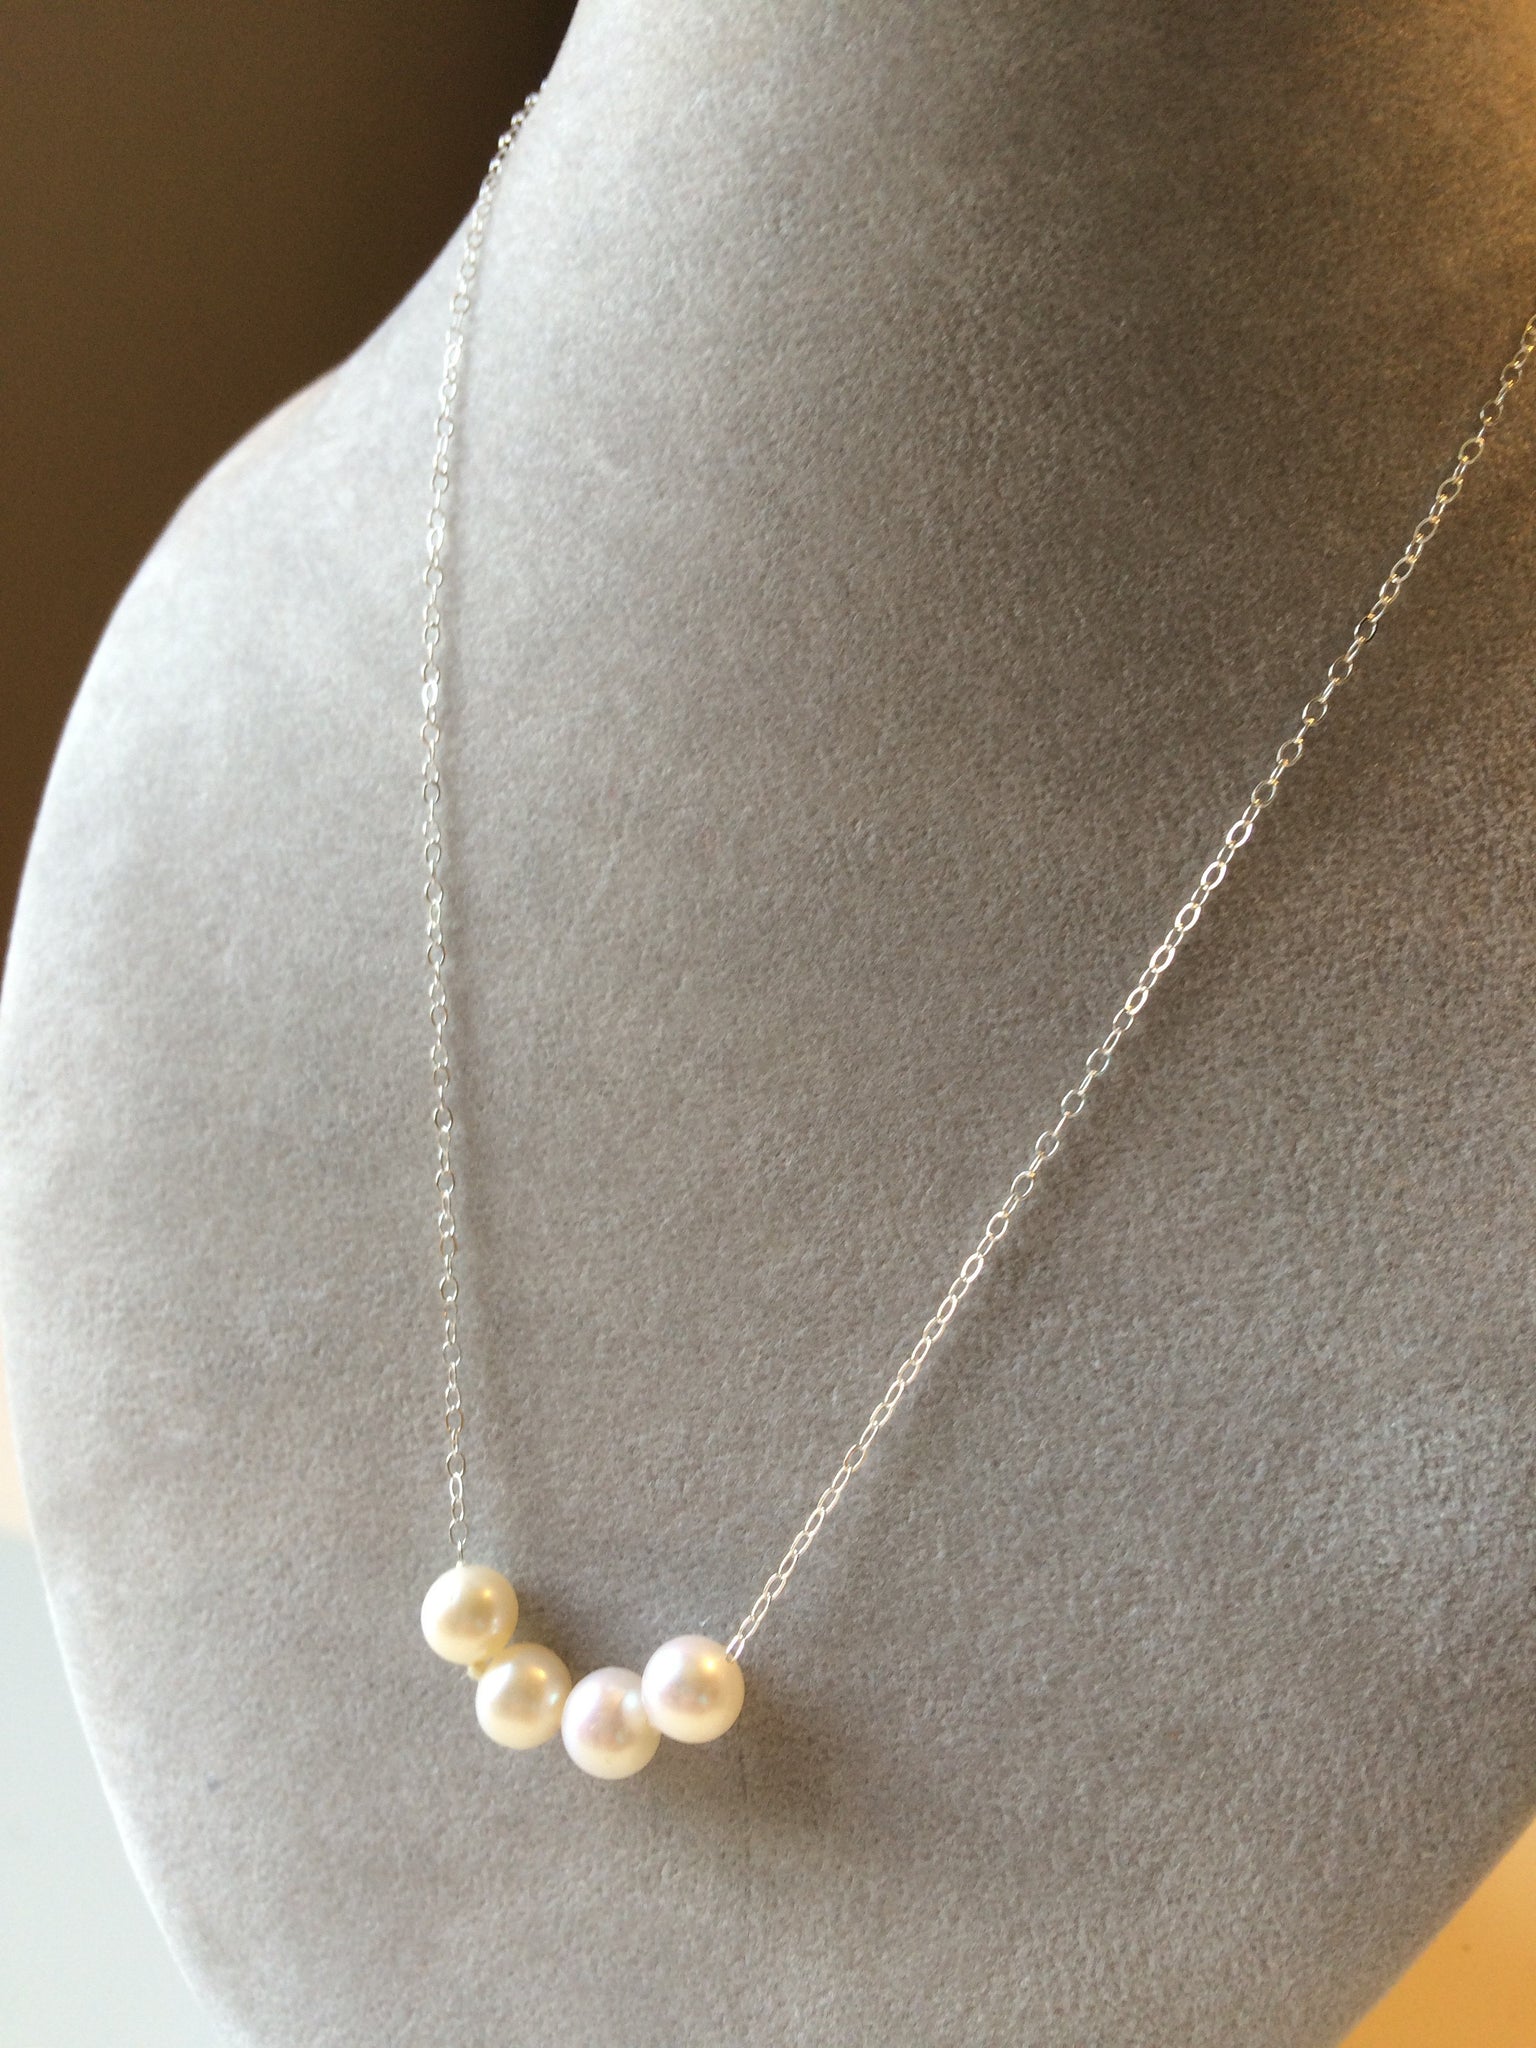 Count Your Blessings Pearl Necklace with Medium Pearls on Chain (18"-20" chain)